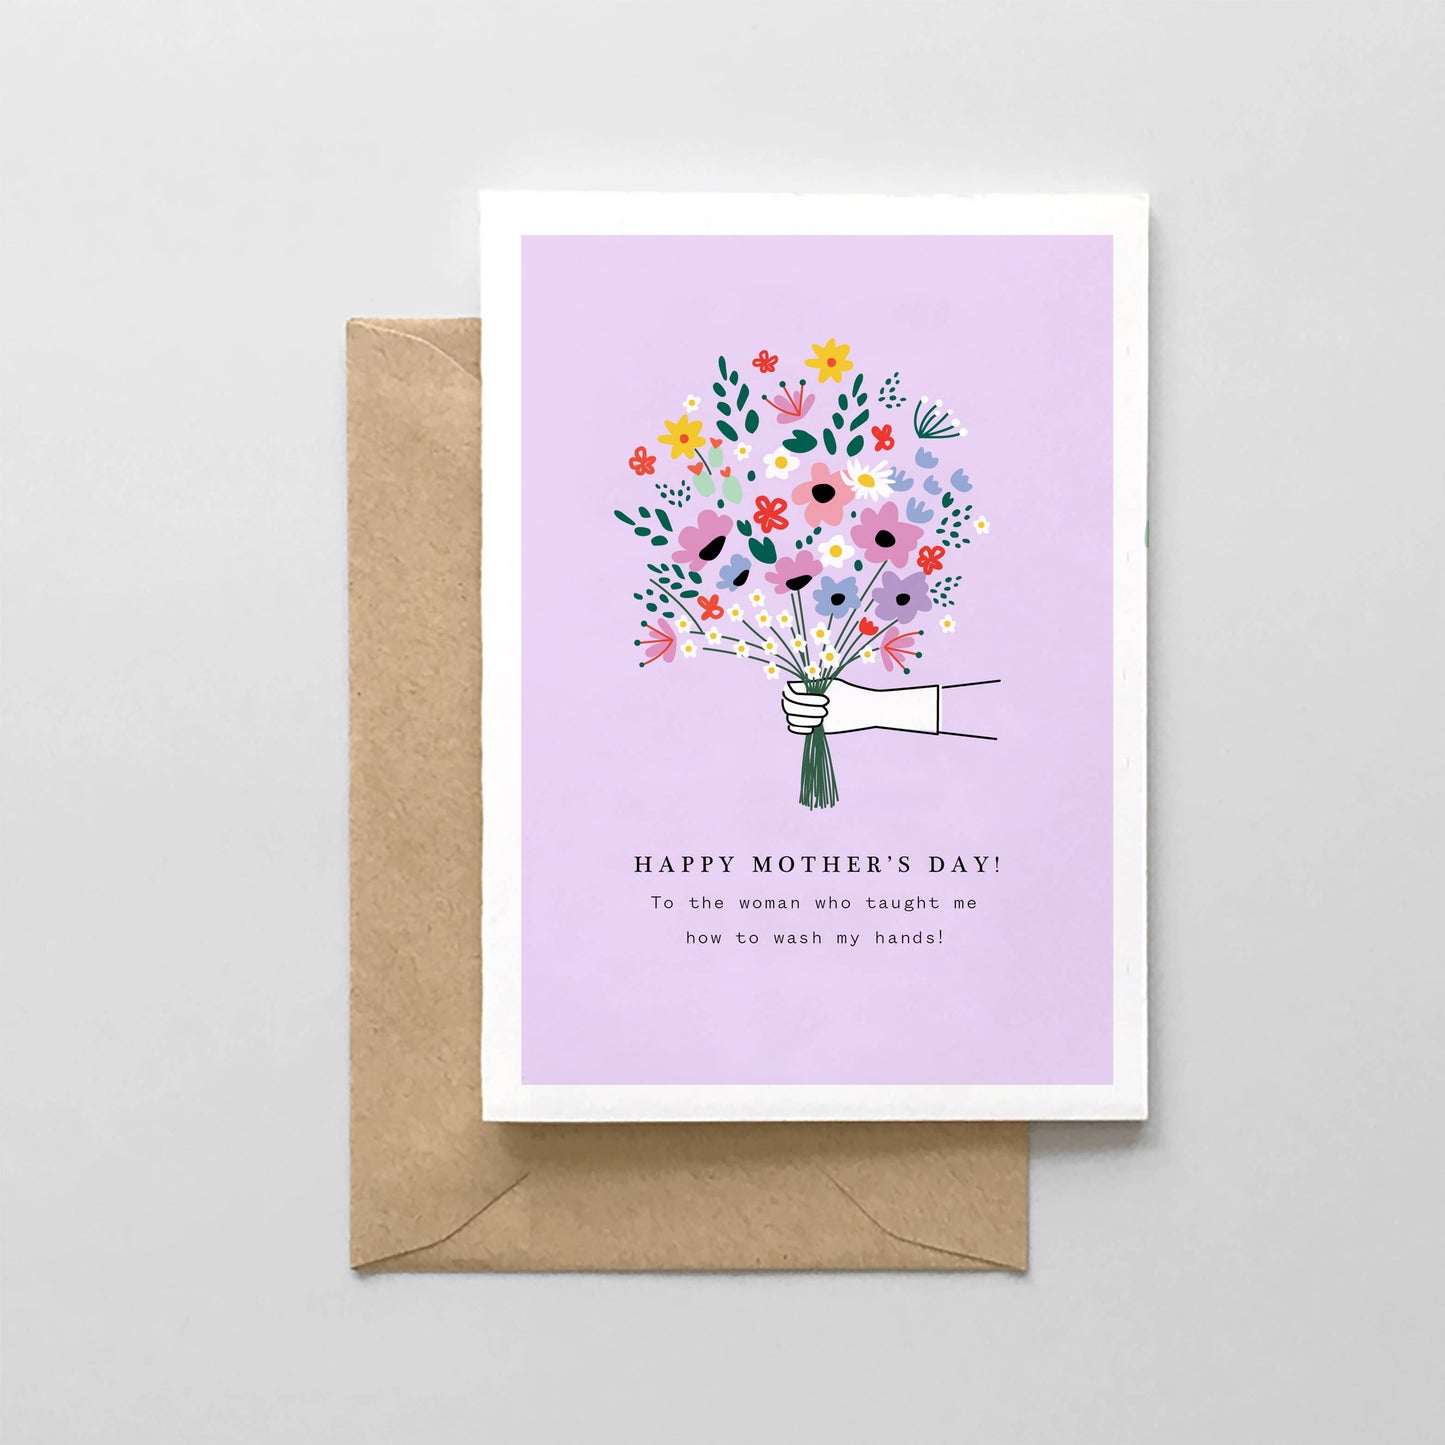 Spaghetti & Meatballs - Wash My Hands - Mother's Day Card